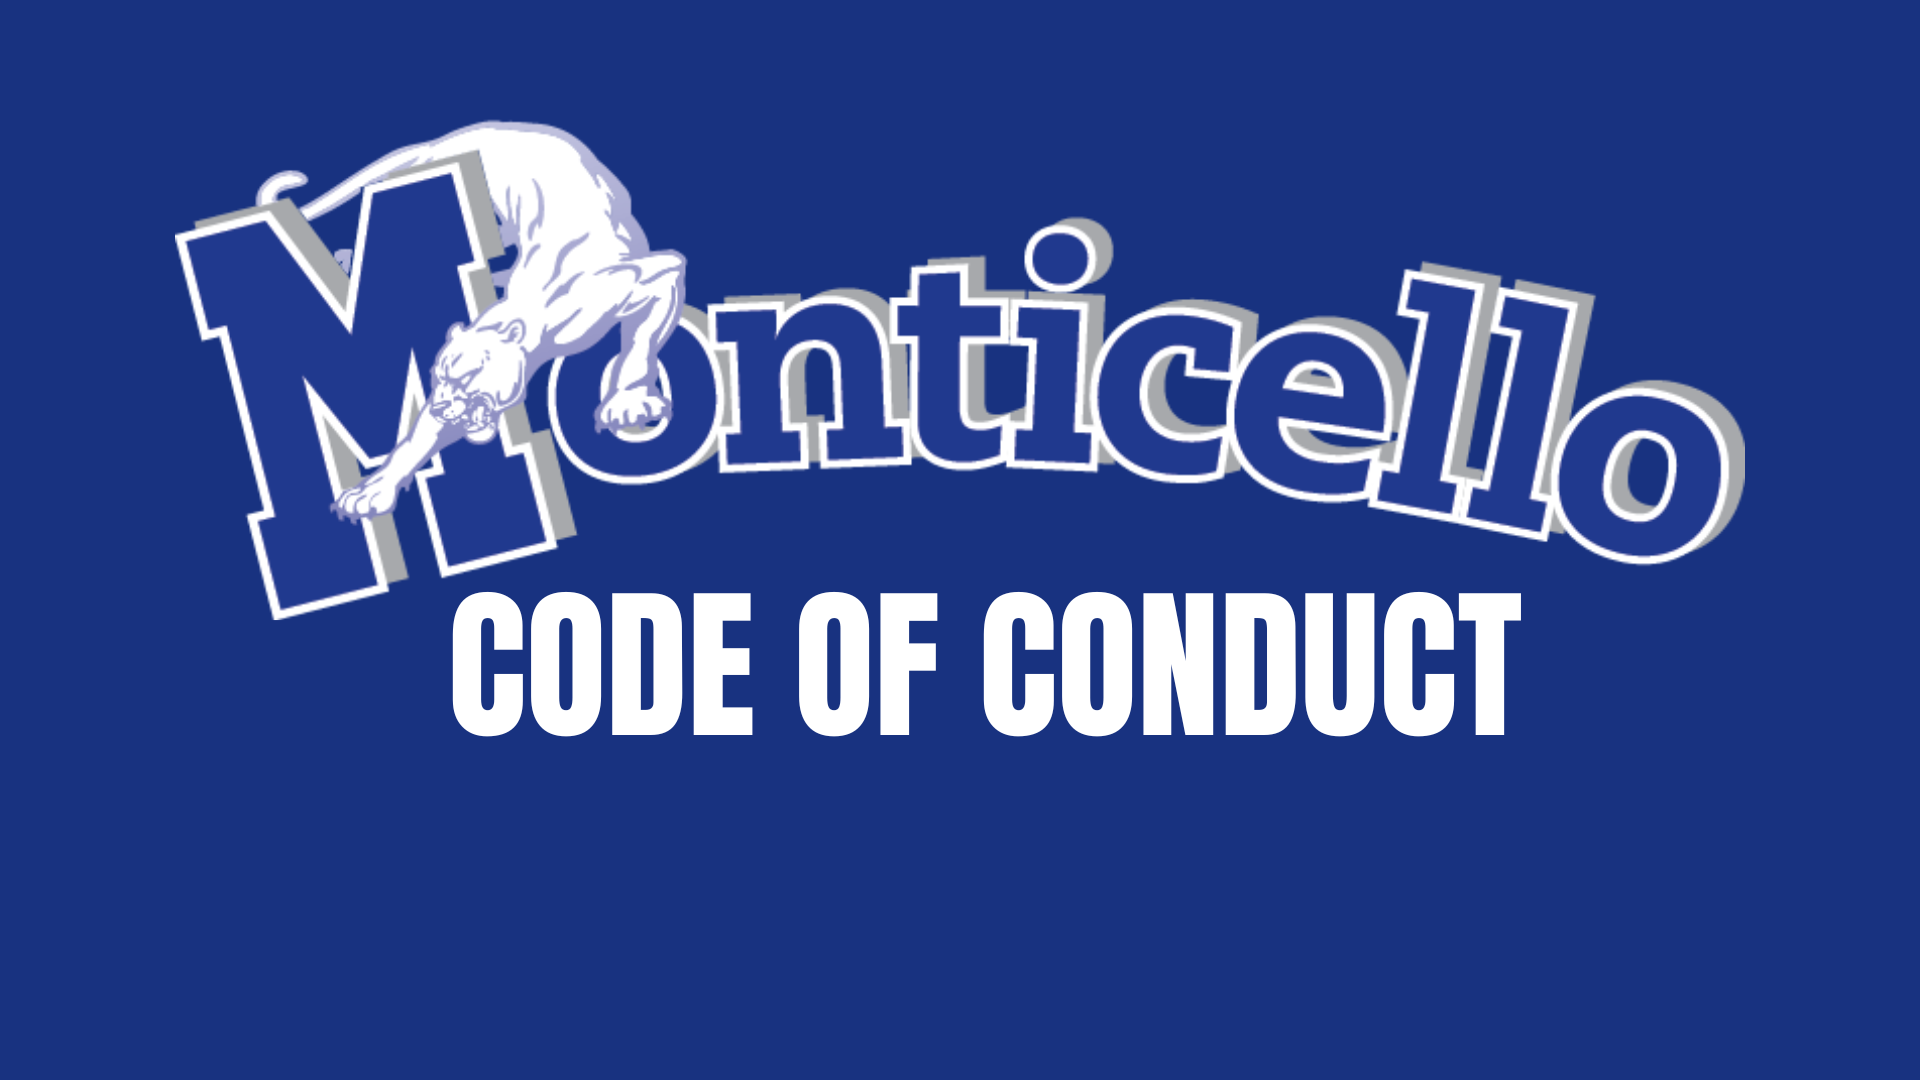 text on image  reads Monticello Code of Conduct